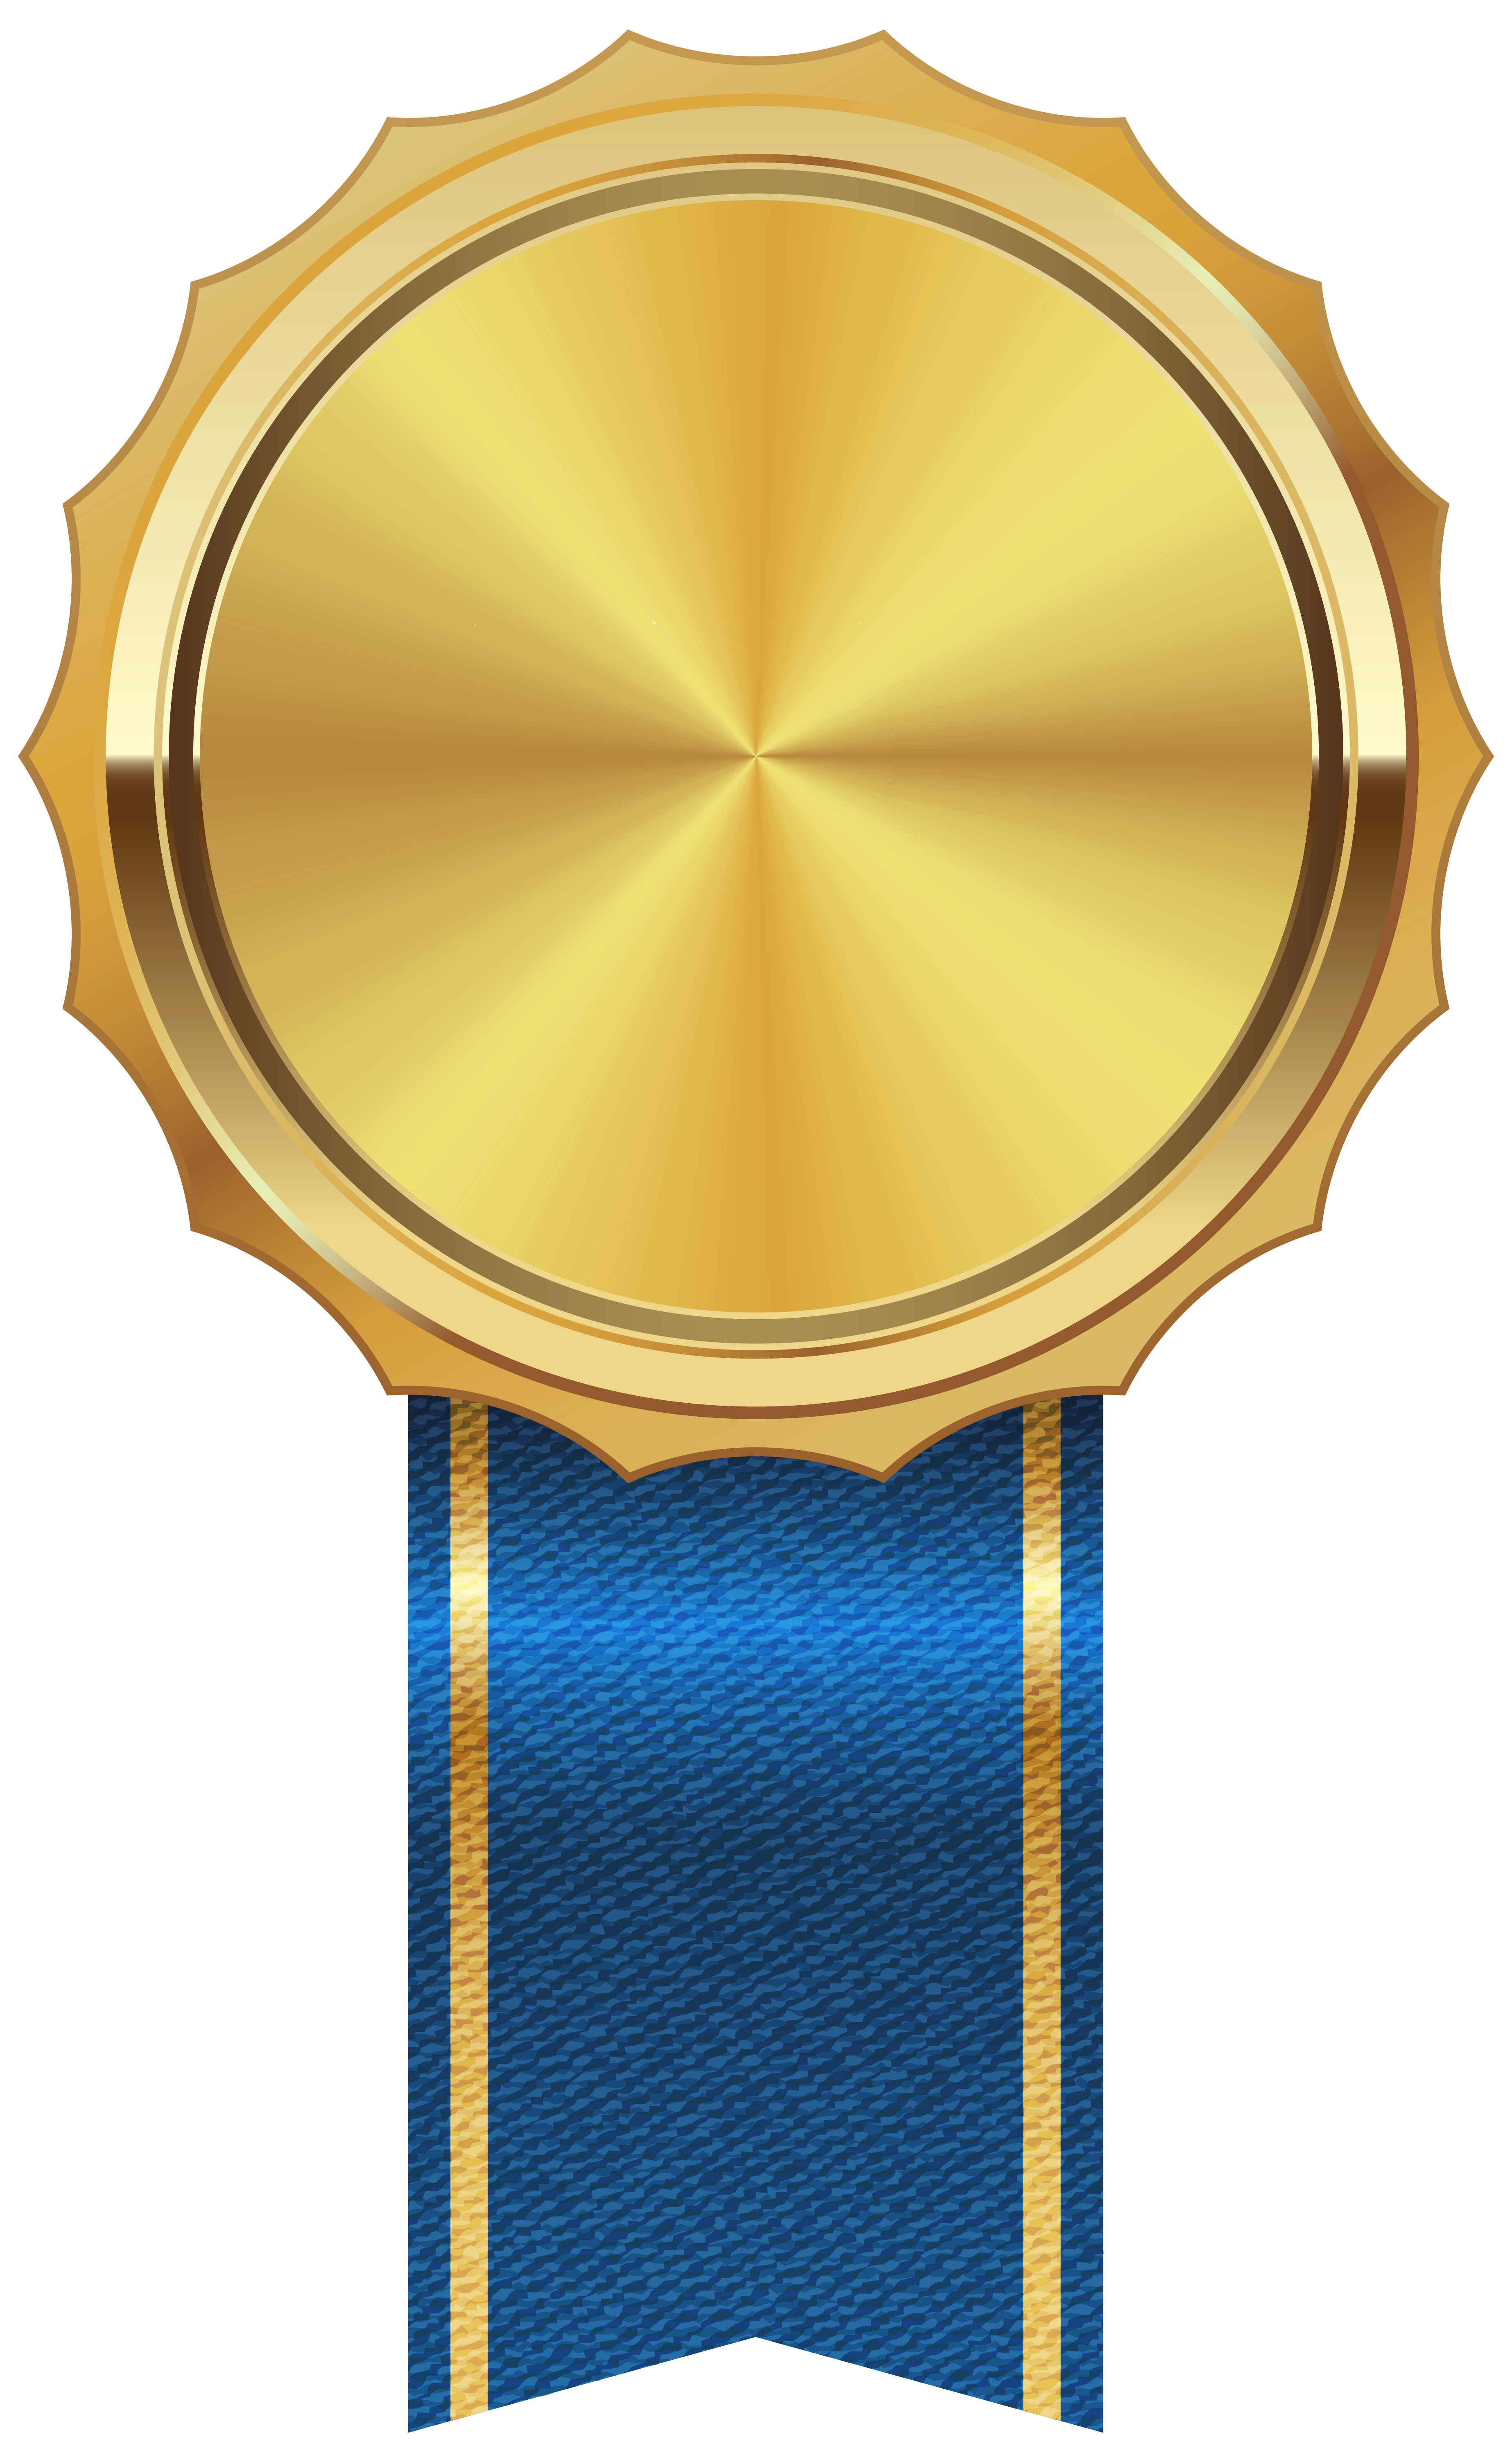 Medal clipart sport. Gold with blue ribbon